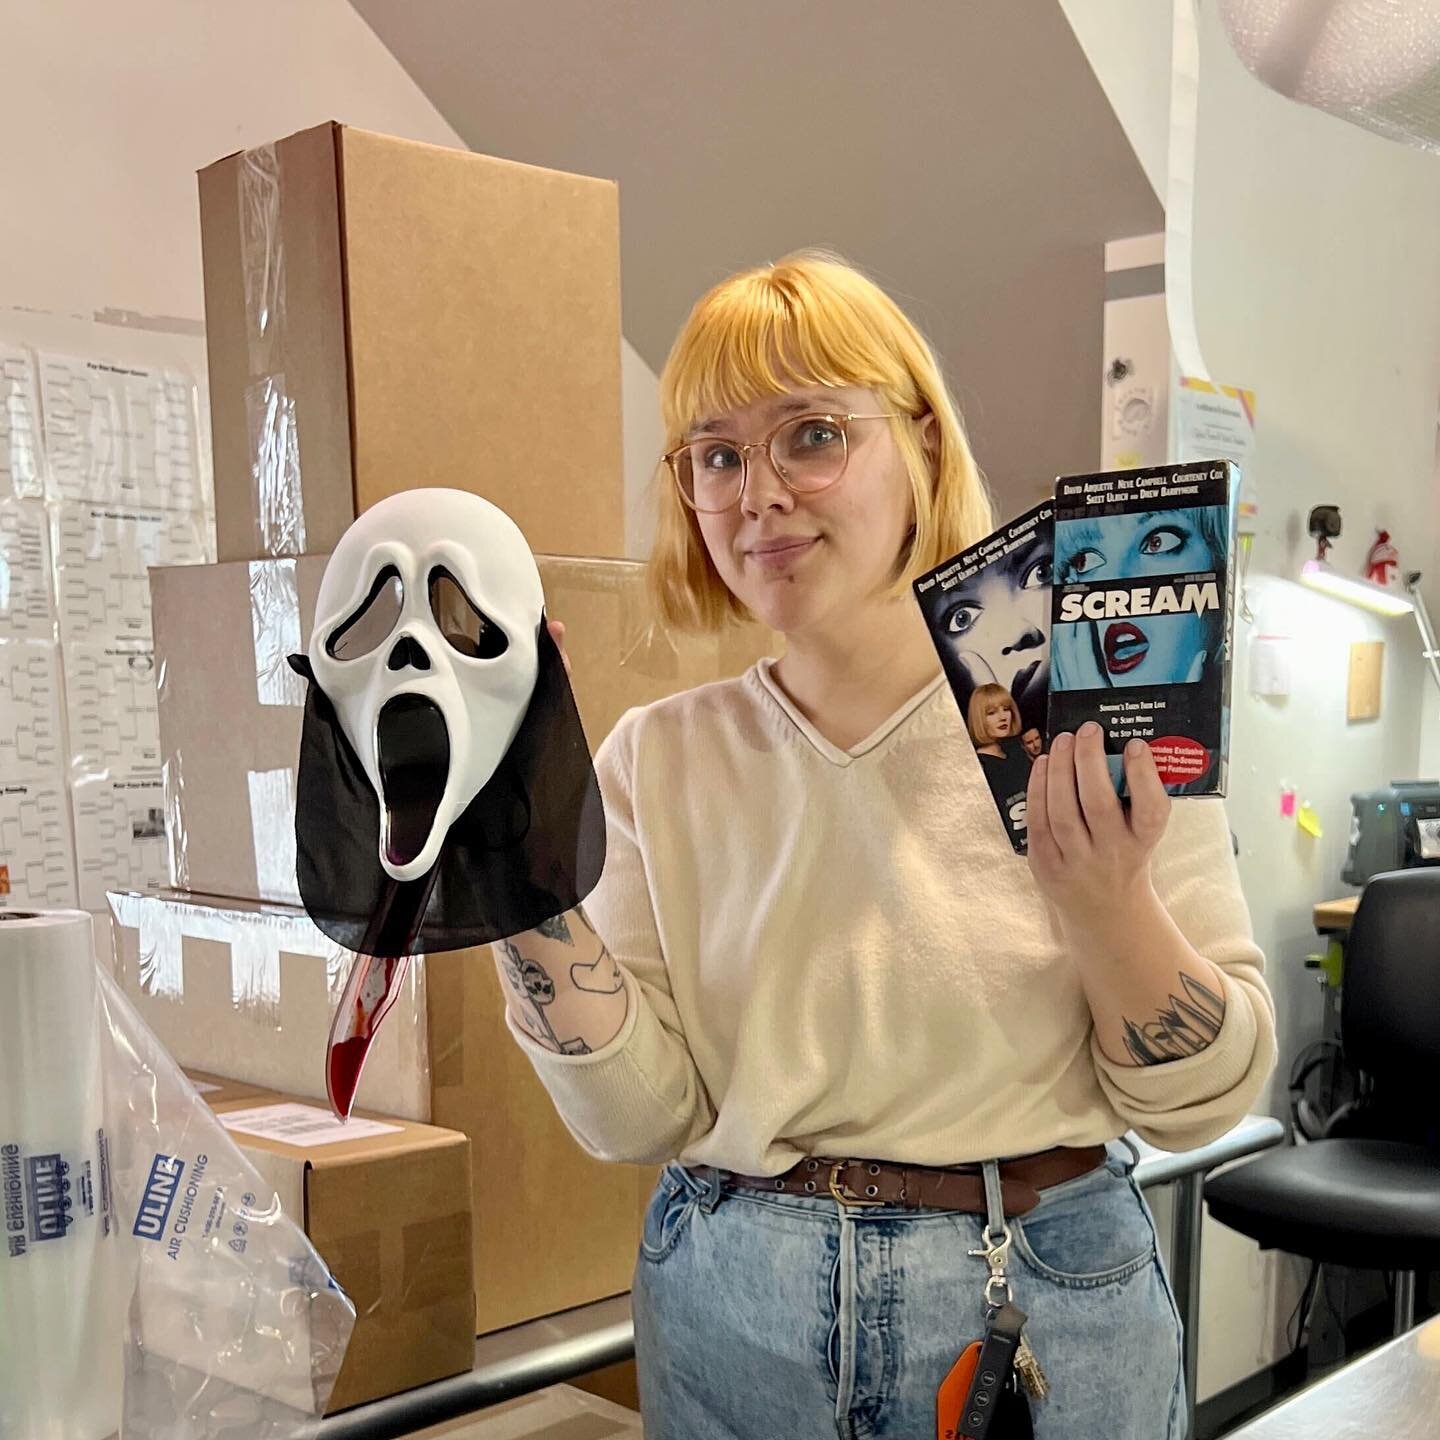 &ldquo;What&rsquo;s your favorite scary movie?&rdquo;
I went to work today as Casey and snuck around as Ghostface when people weren&rsquo;t paying attention! 
Thanks to my wonderful friend @mrsvandervyver bleached my hair yesterday for the final touc